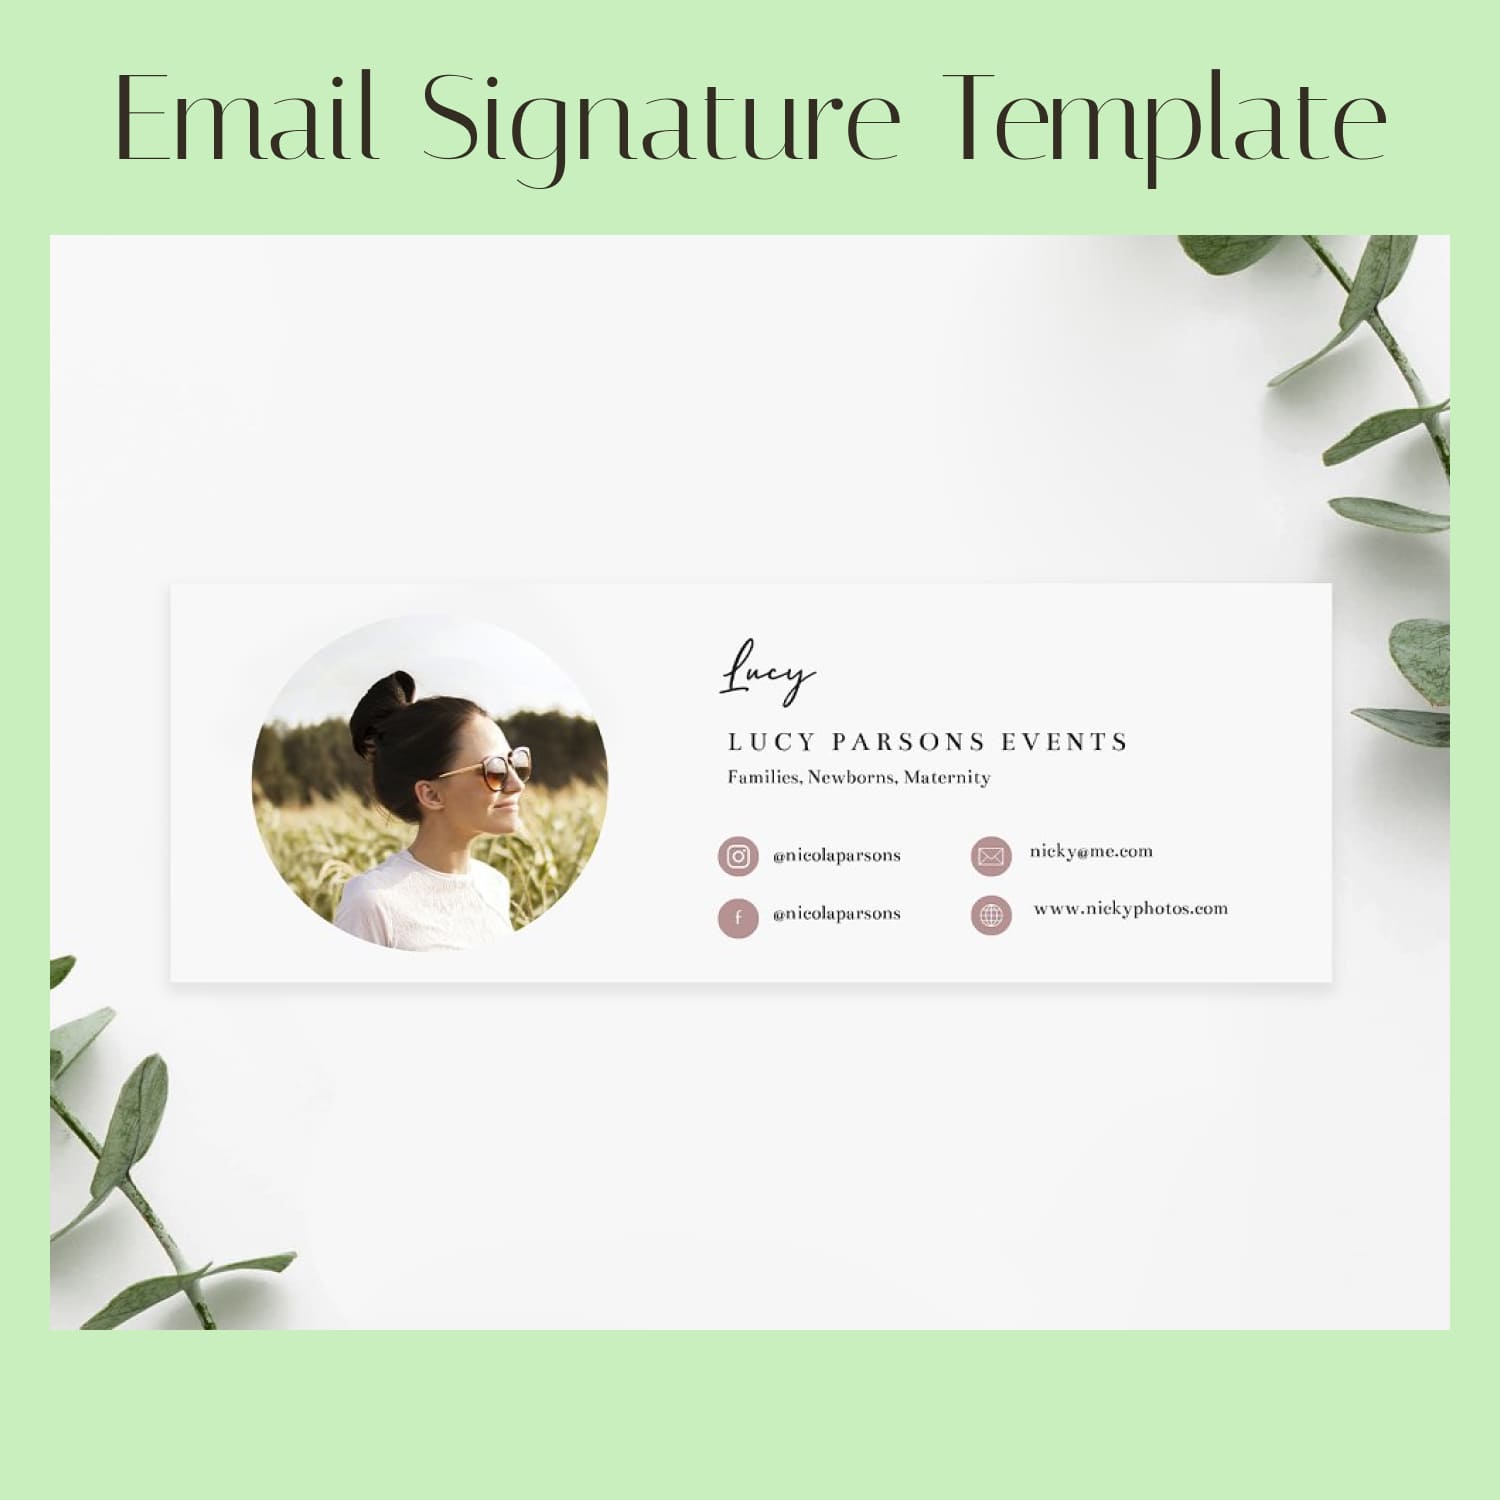 Image of an elegant email signature template.